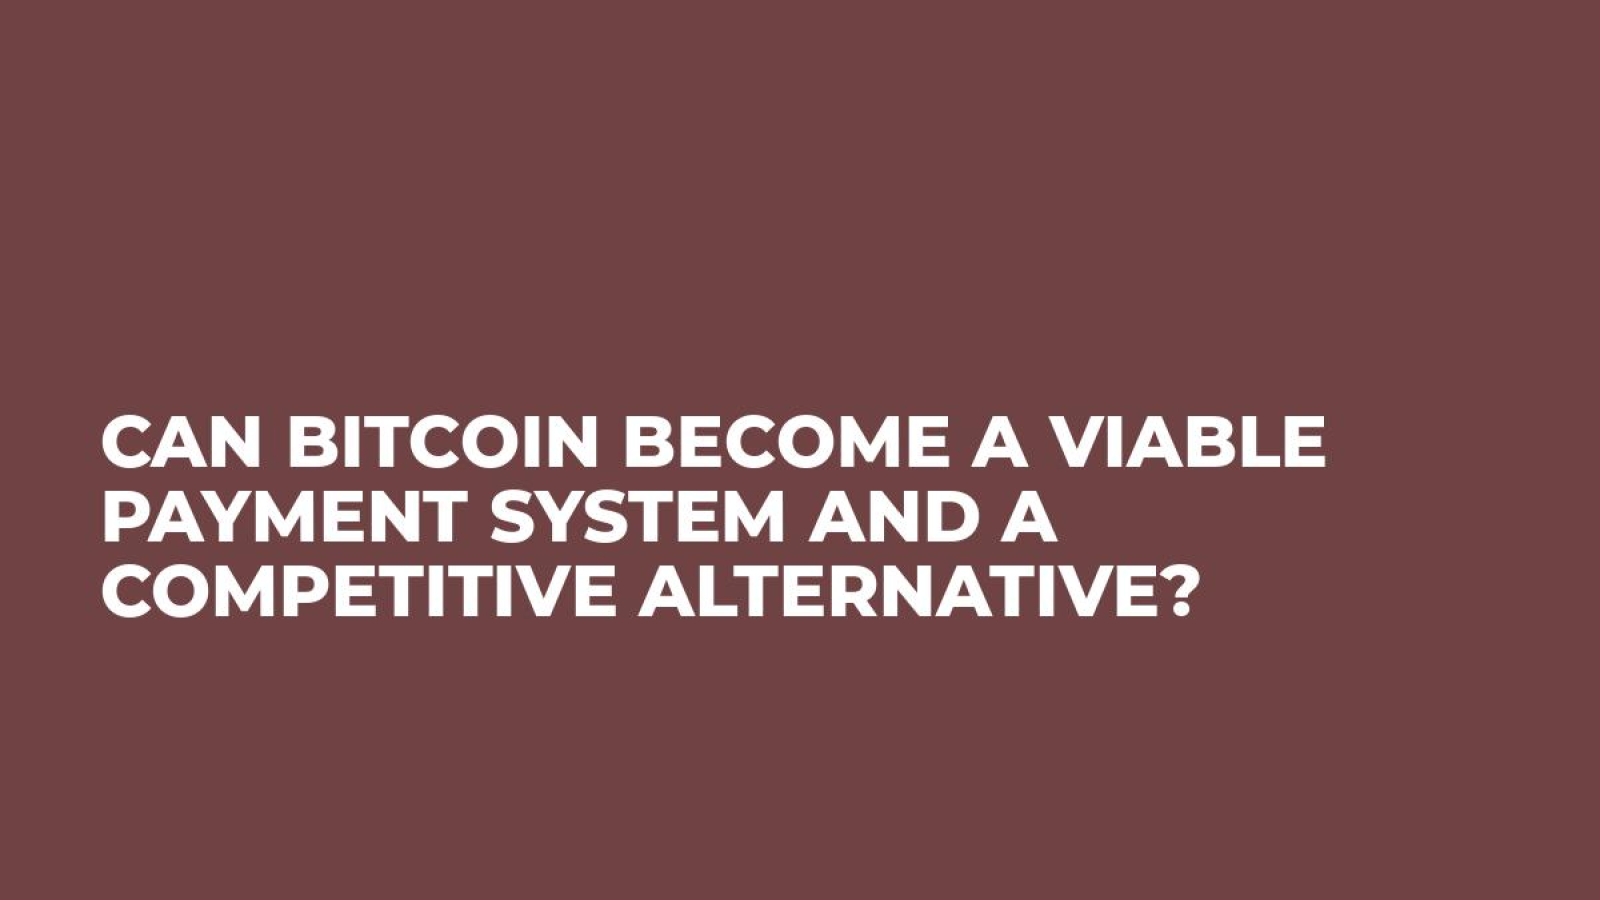 Can Bitcoin Become a Viable Payment System and a Competitive Alternative?